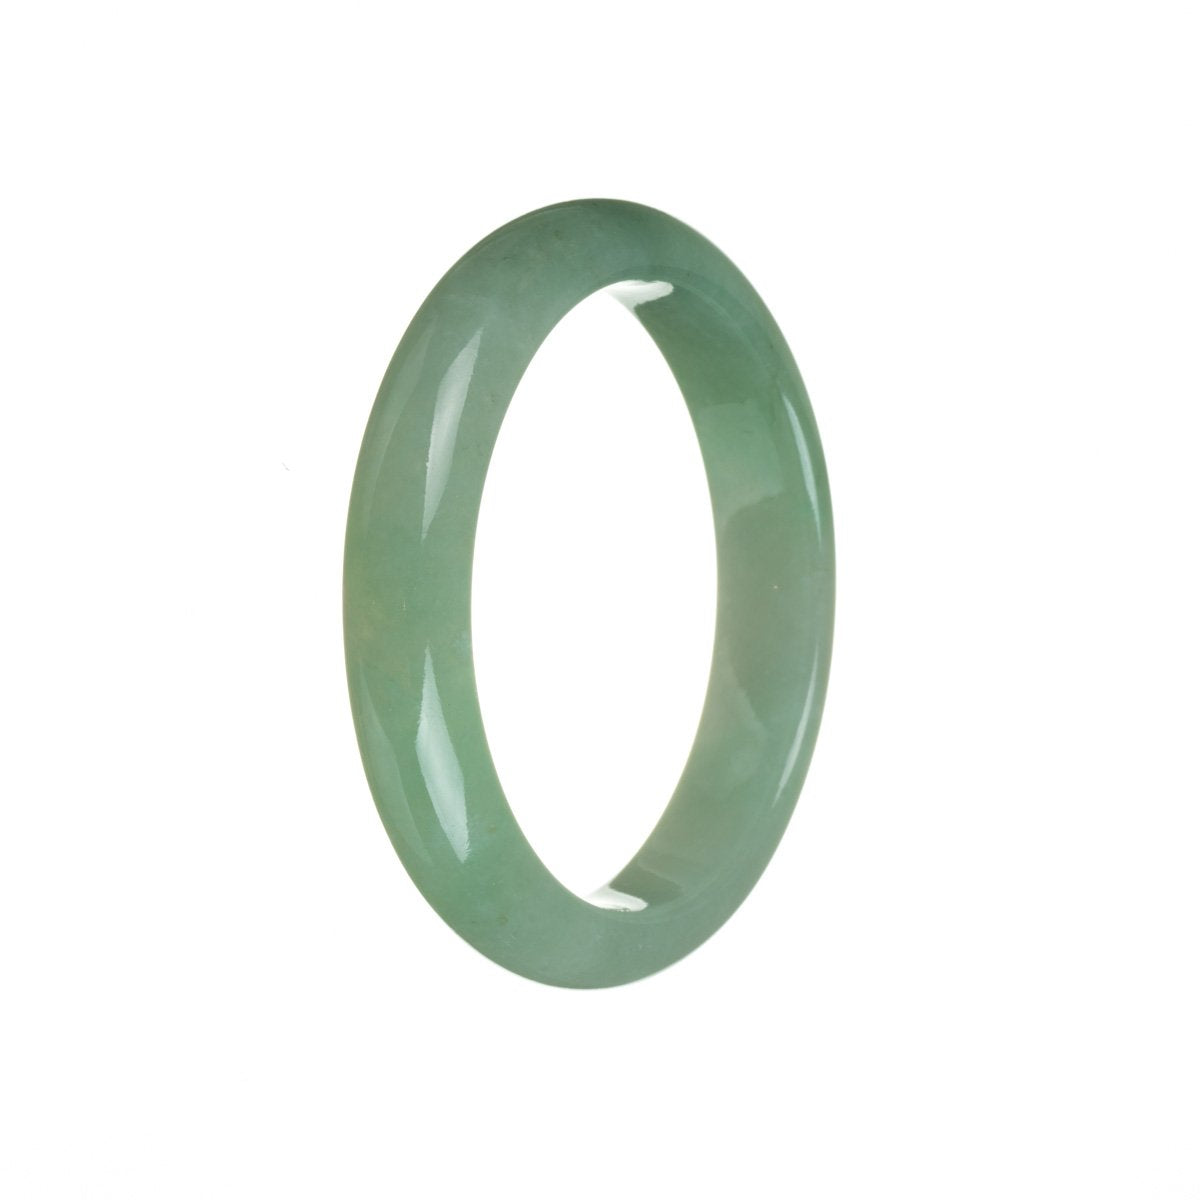 A half-moon shaped green Burmese jade bangle, 55mm in size, showcasing the untreated and natural beauty of the gemstone.